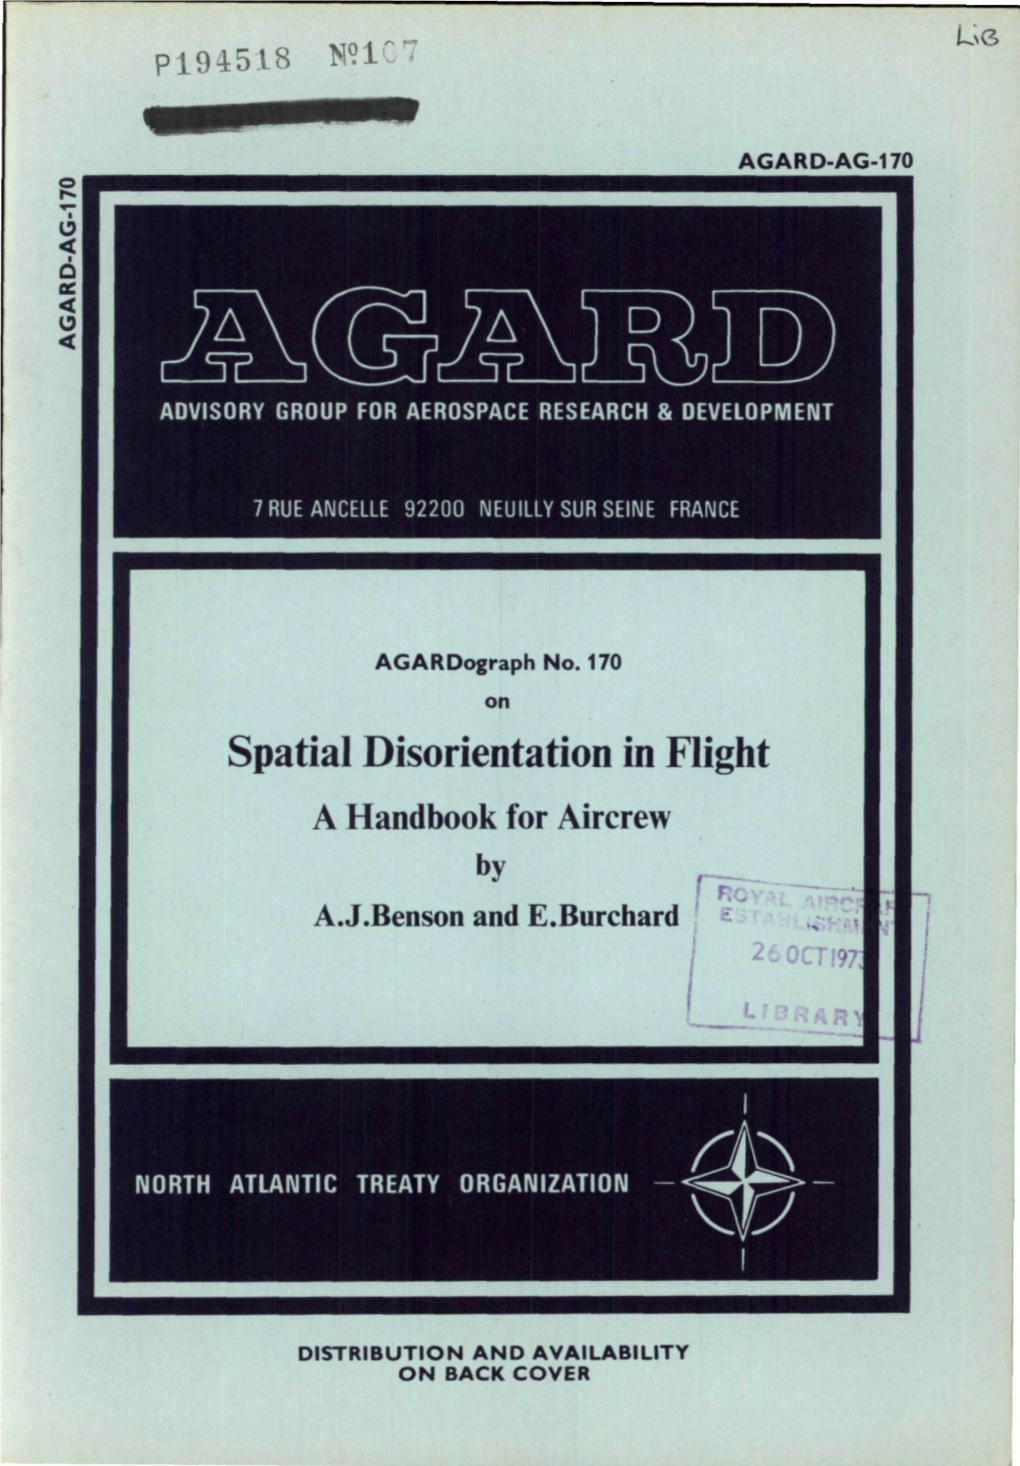 Spatial Disorientation in Flight a Handbook for Aircrew by A.J.Benson and E.Burchard Rs